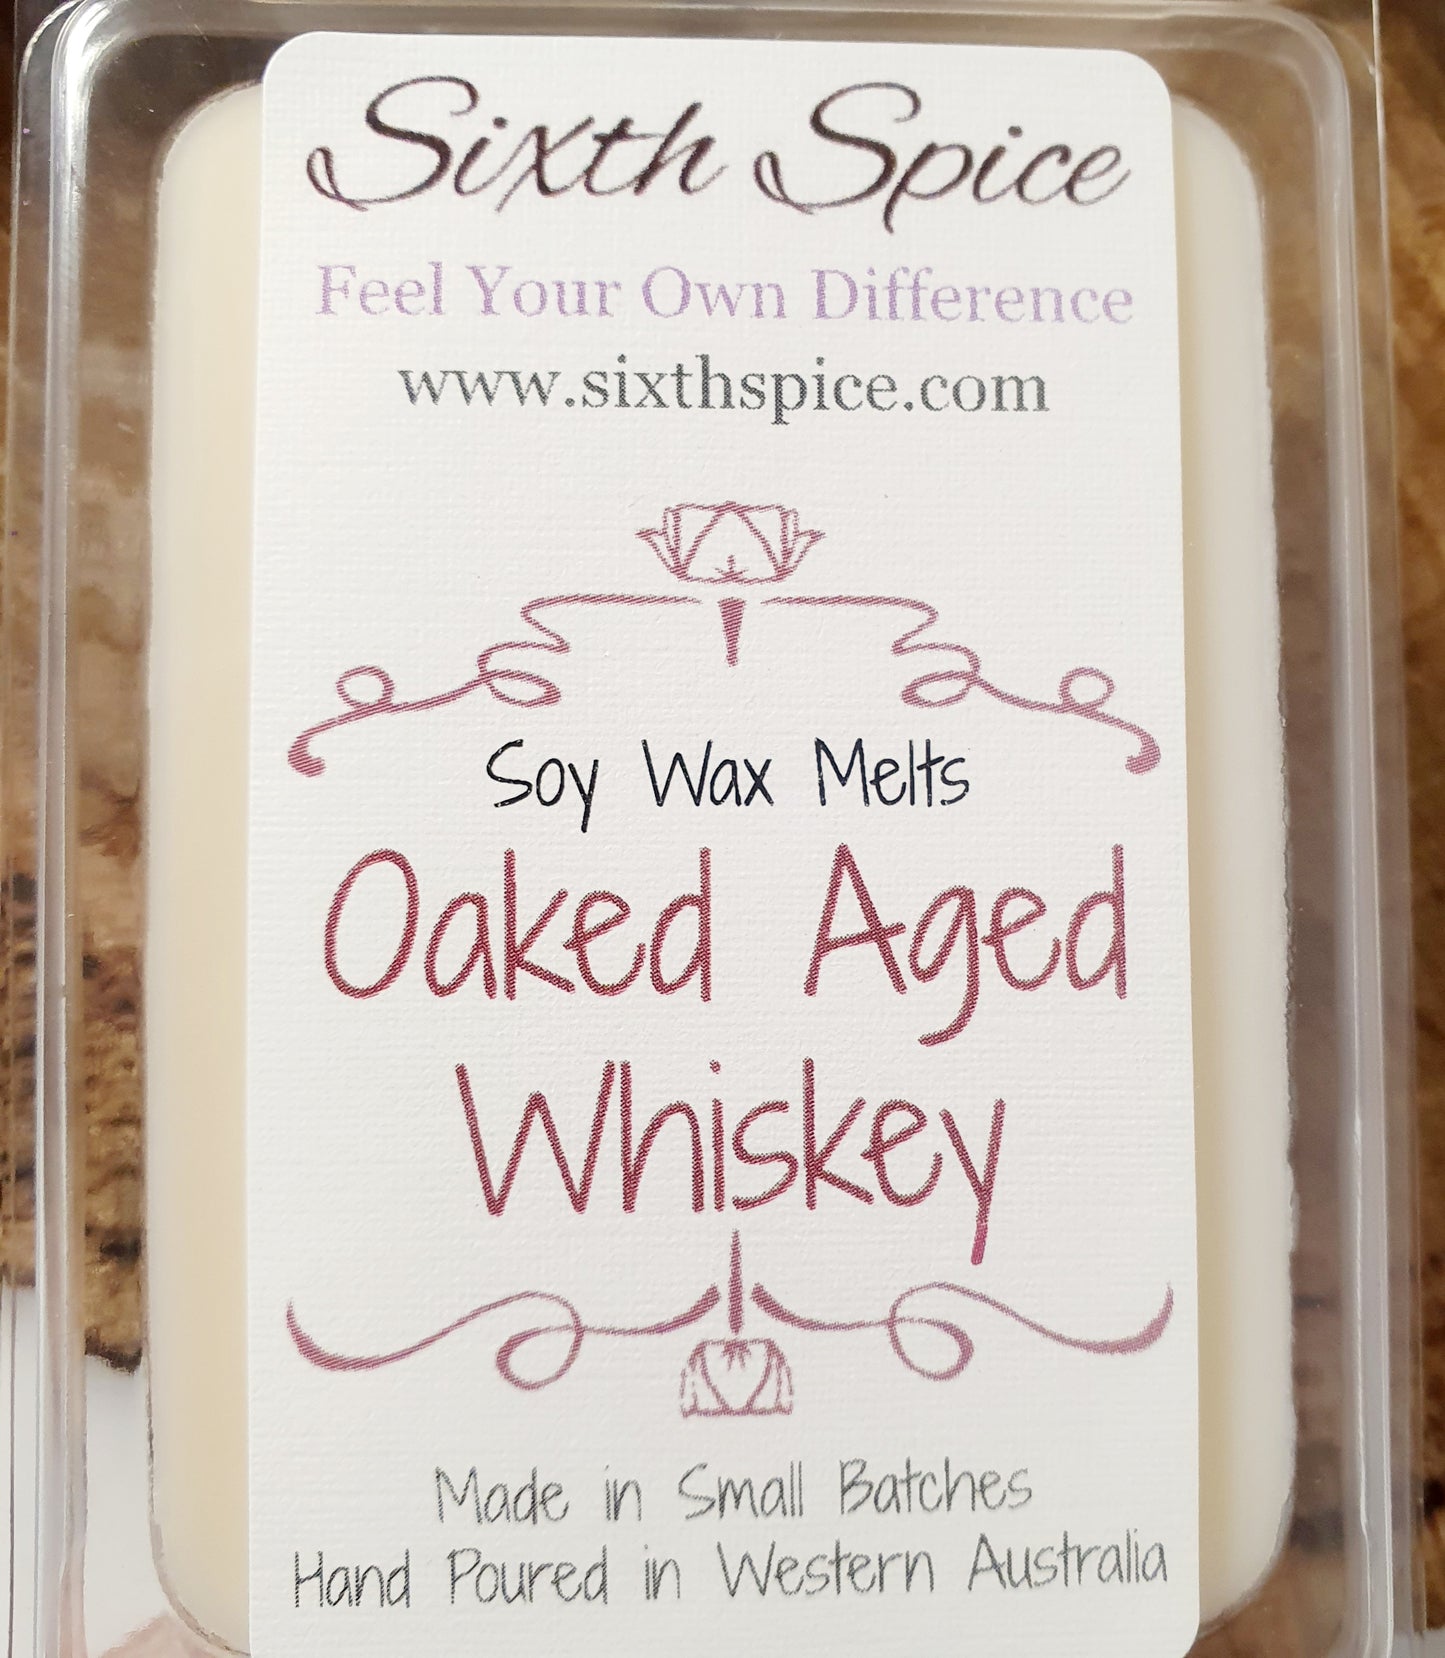 Oaked Aged Whiskey - Soy Wax Melts